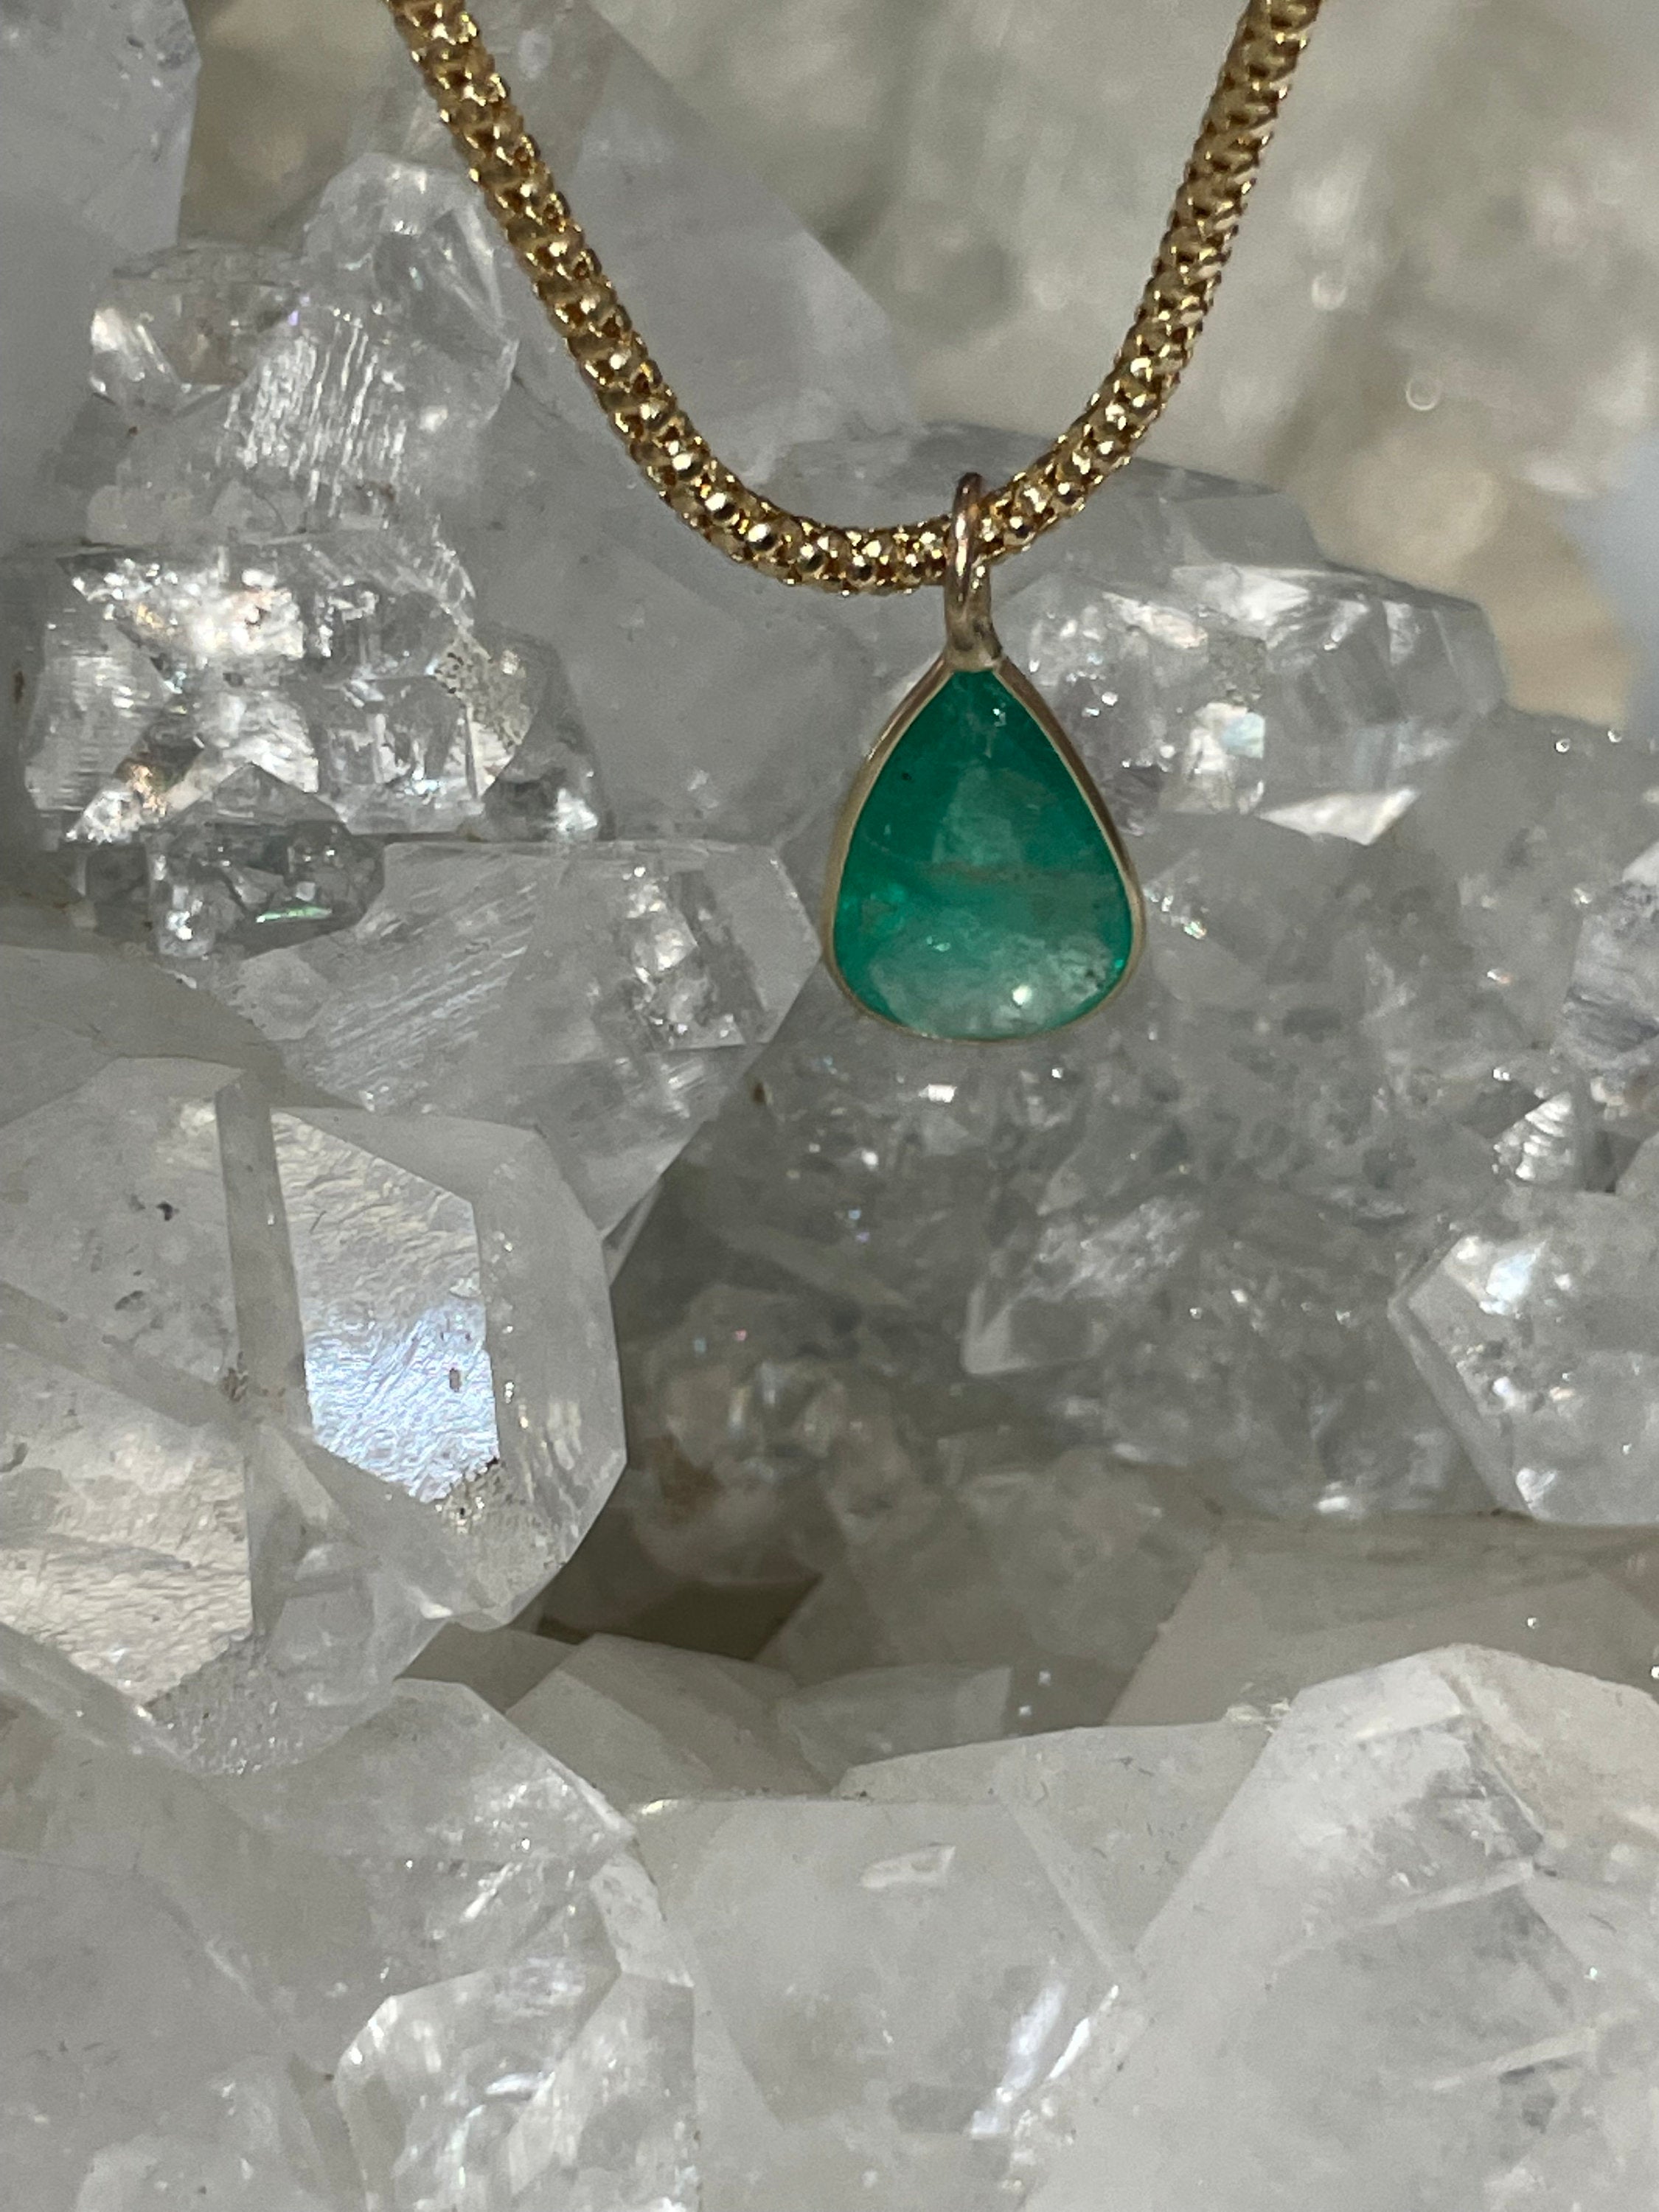 Shimmering! 2.6CT Natural Colombian Emerald 14K Yellow Gold Bezeled Charm Pendant OOAK 17x8mm